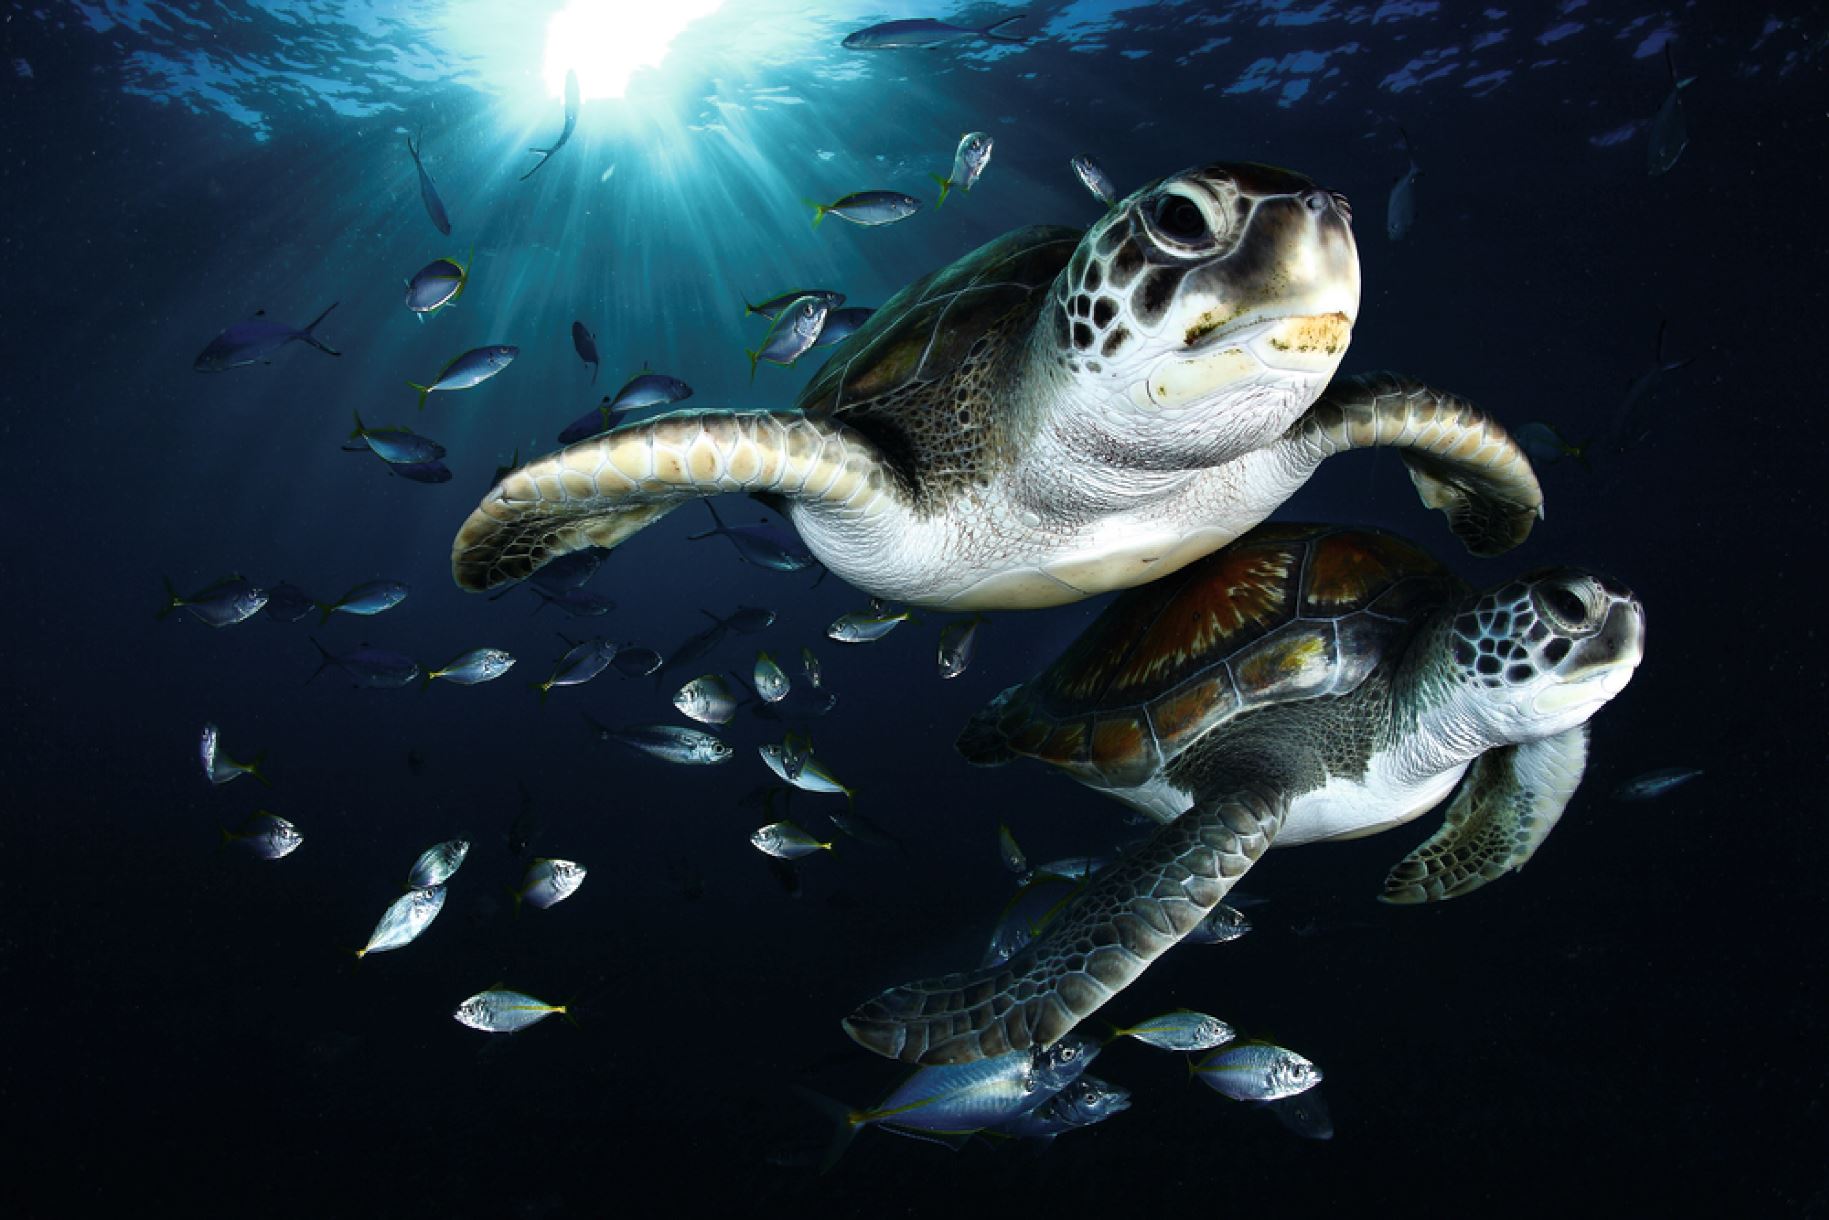 Sea turtles in the Canary Islands